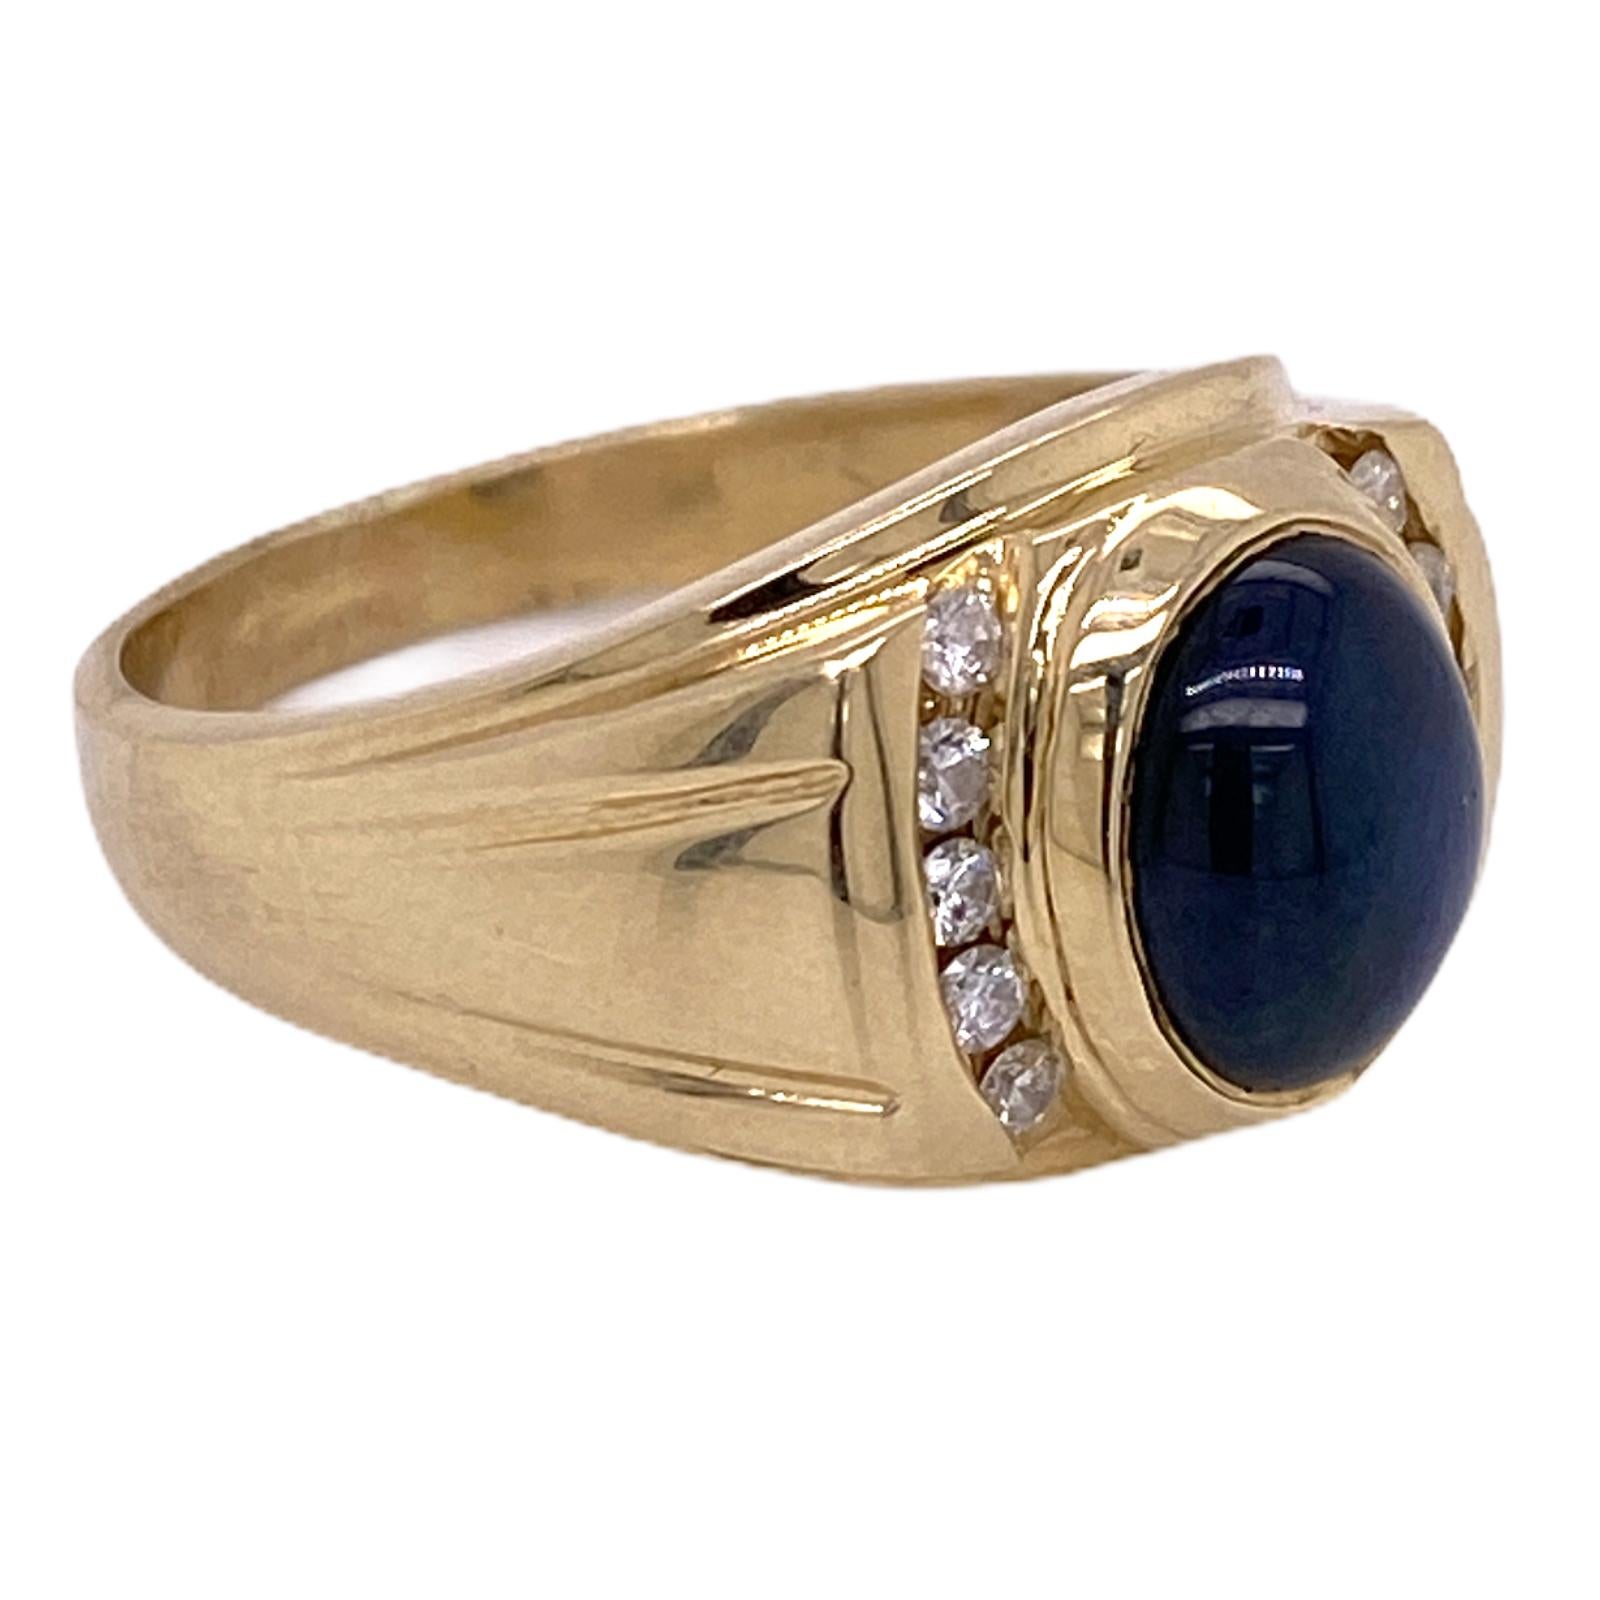 Men's cabochon blue sapphire diamond ring fashioned in 14 karat yellow gold. The natural blue cabochon sapphire weighs approximately 4.50 carats and is flanked by 10 round brilliant cut diamonds weighing .30 carat total weight. The ring measures